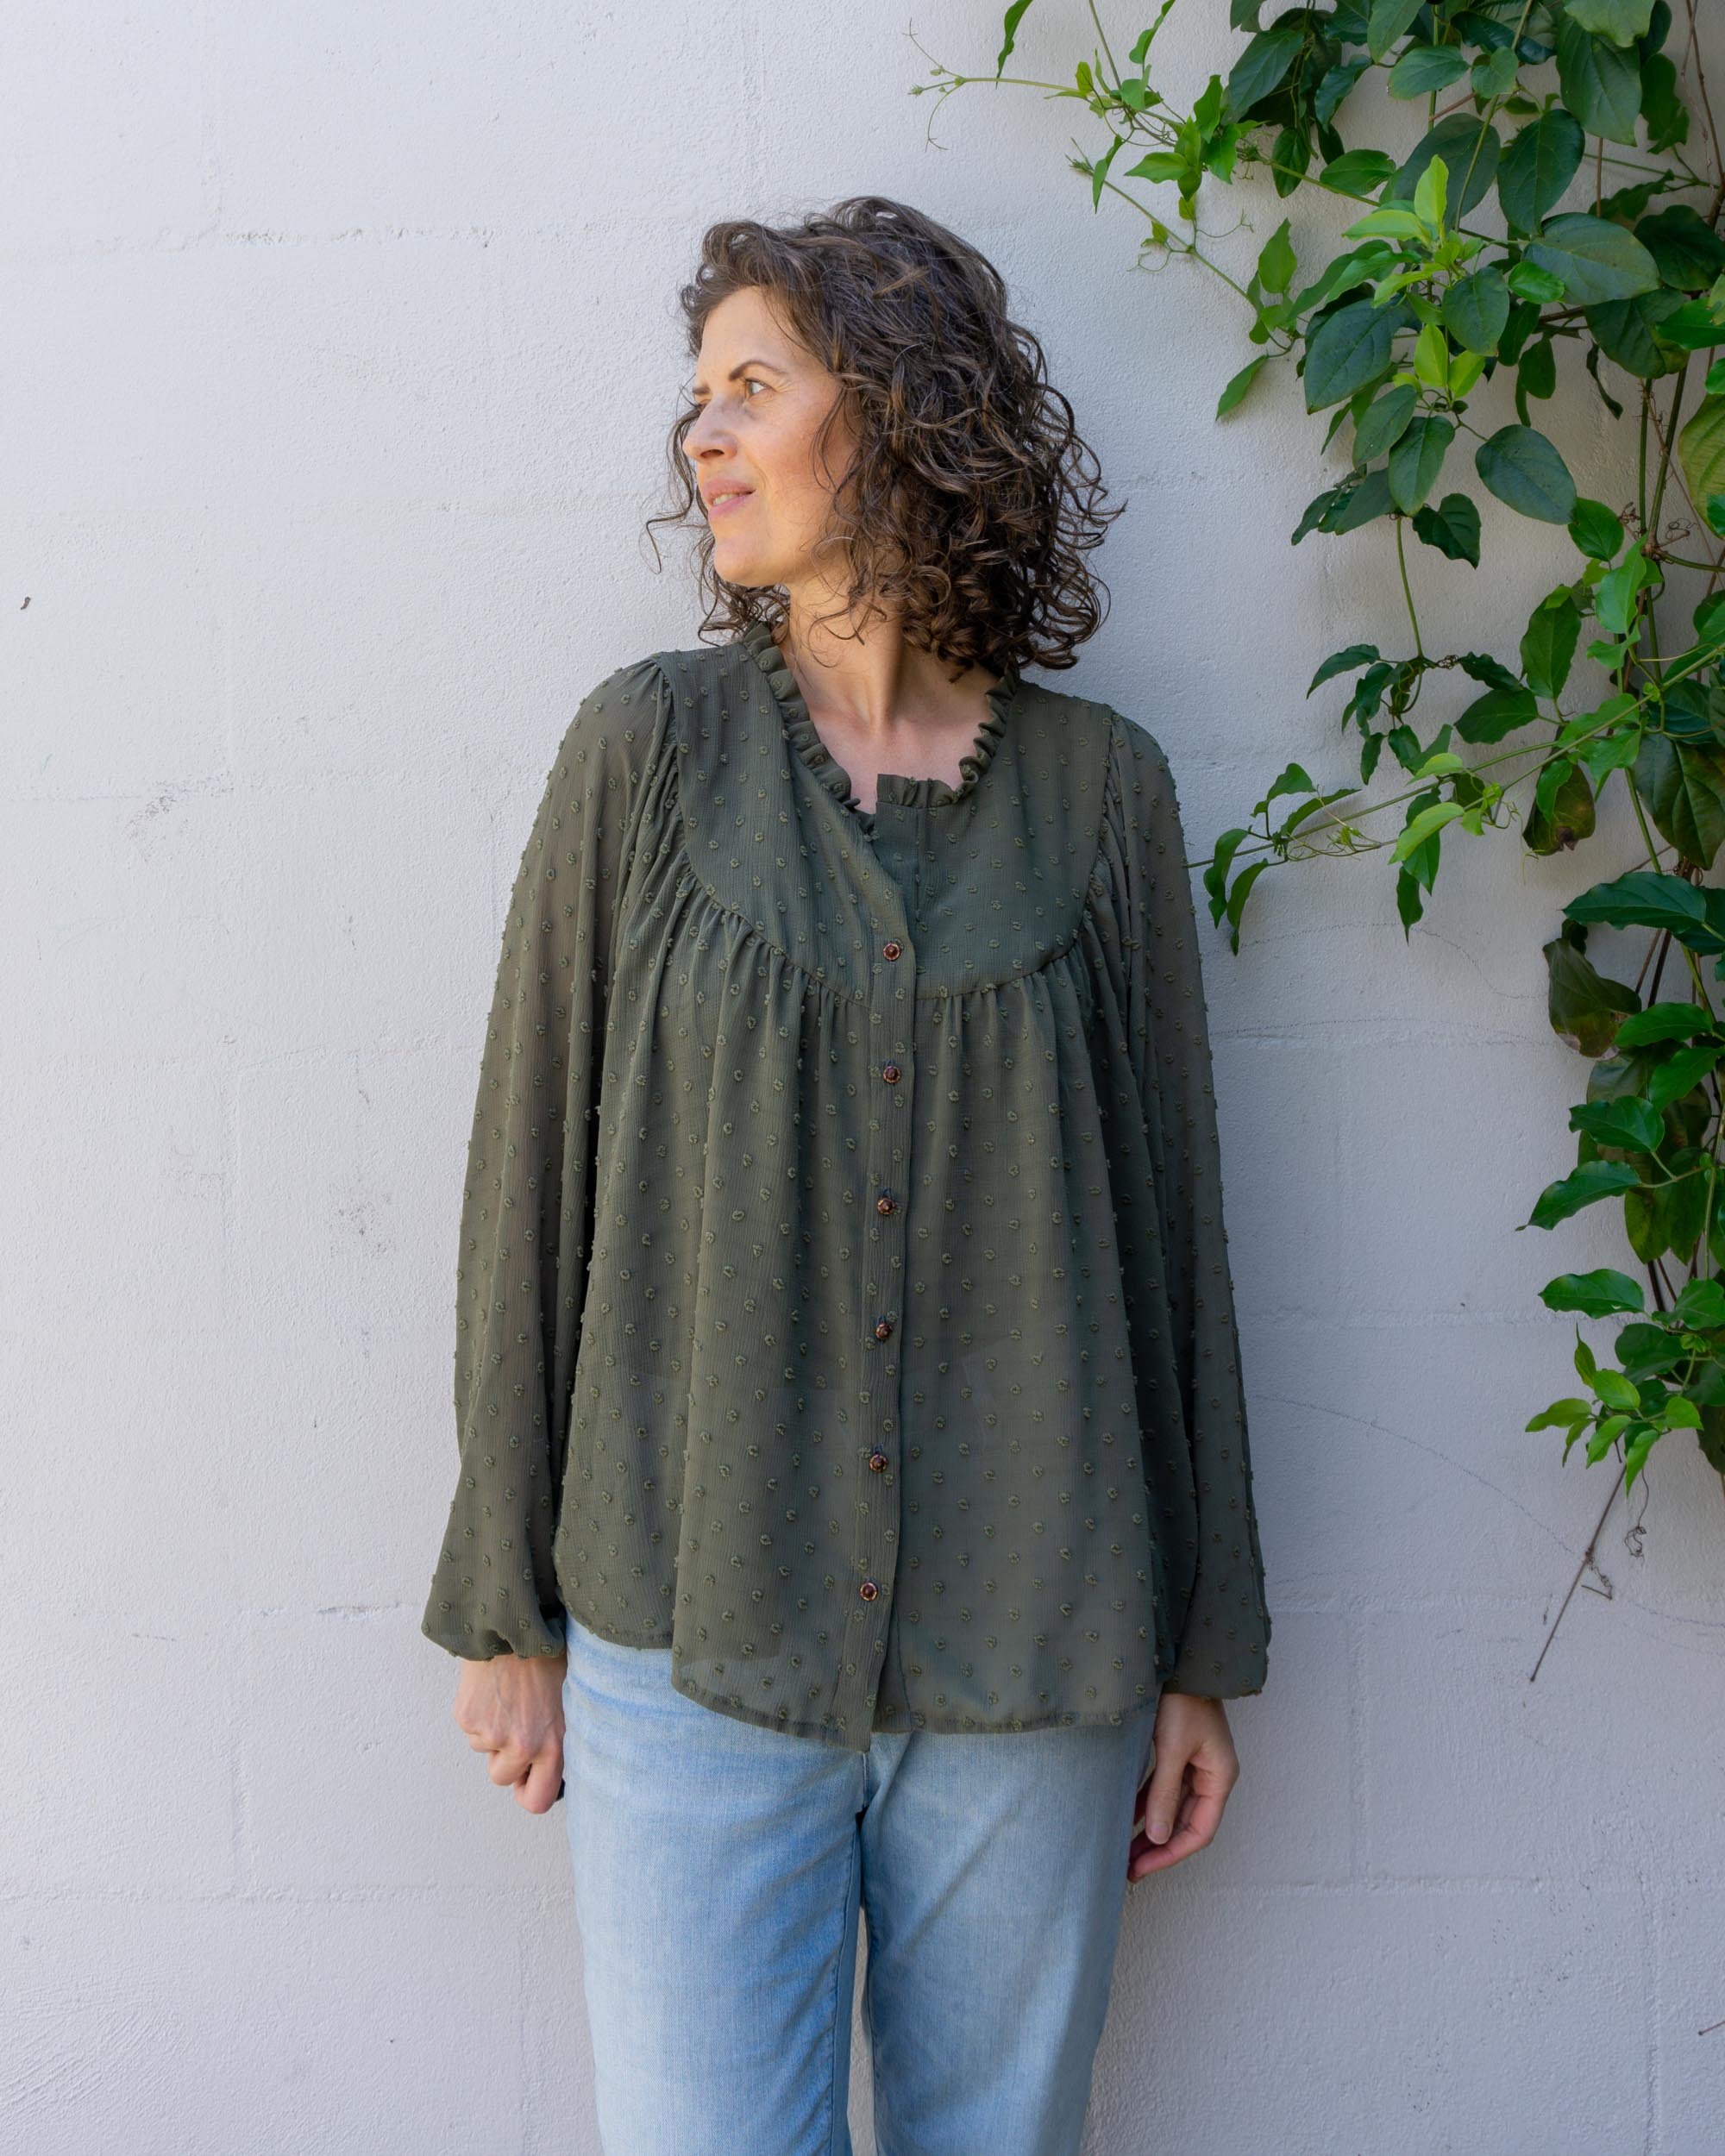 DIY Gathered Yoke Blouse — A review of the Aims pattern by